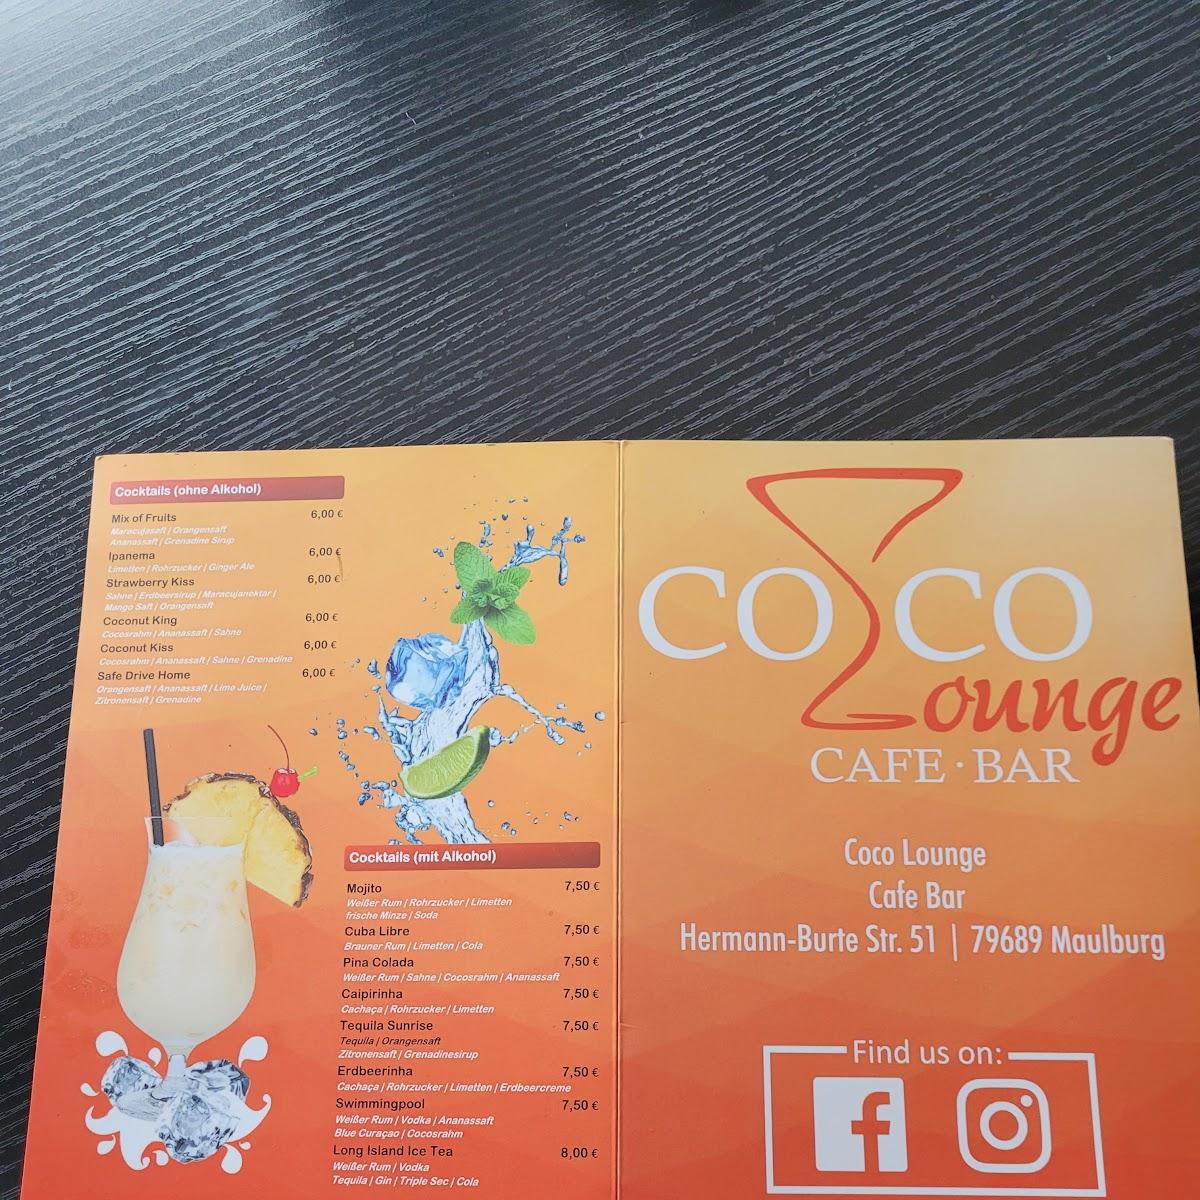 Restaurant "Coco Lounge" in Maulburg